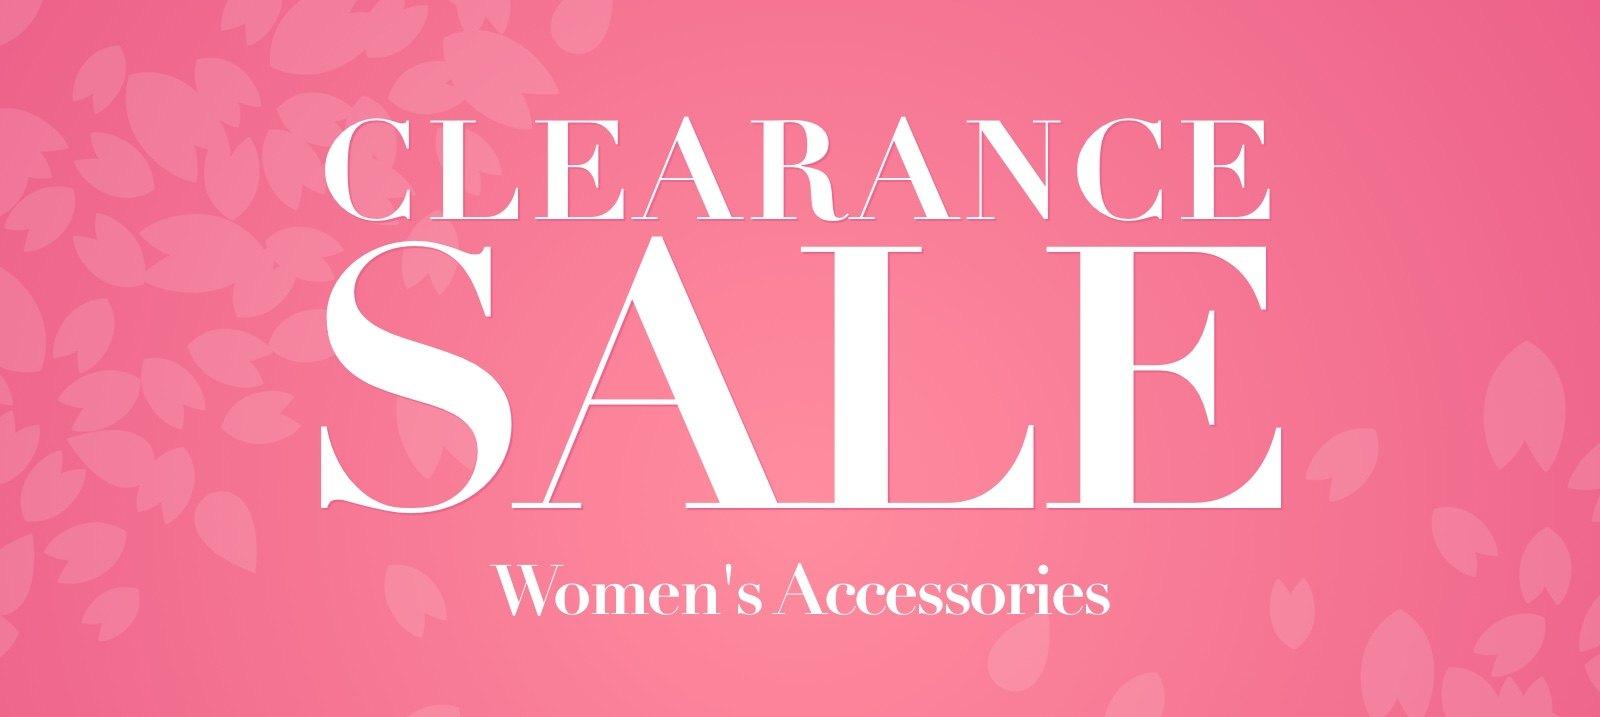 Clearance sale：Women's Accessories